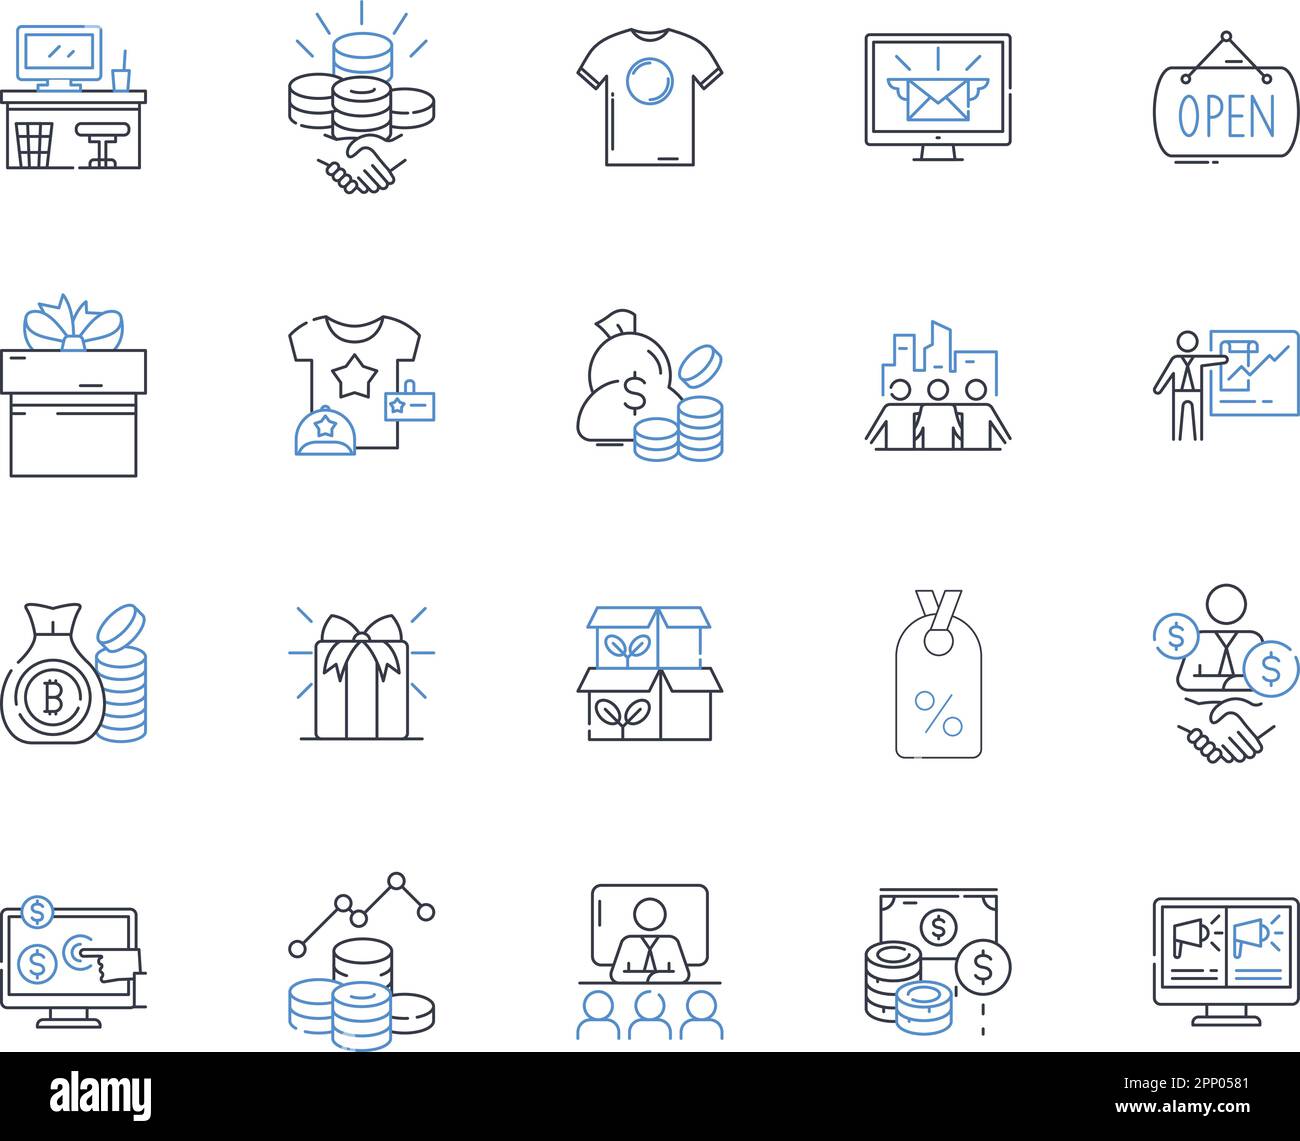 Possess and profit line icons collection. Acquire, Benefit, Capture, Command, Control, Earn, Gain vector and linear illustration. Hoard,Own,Prevail Stock Vector